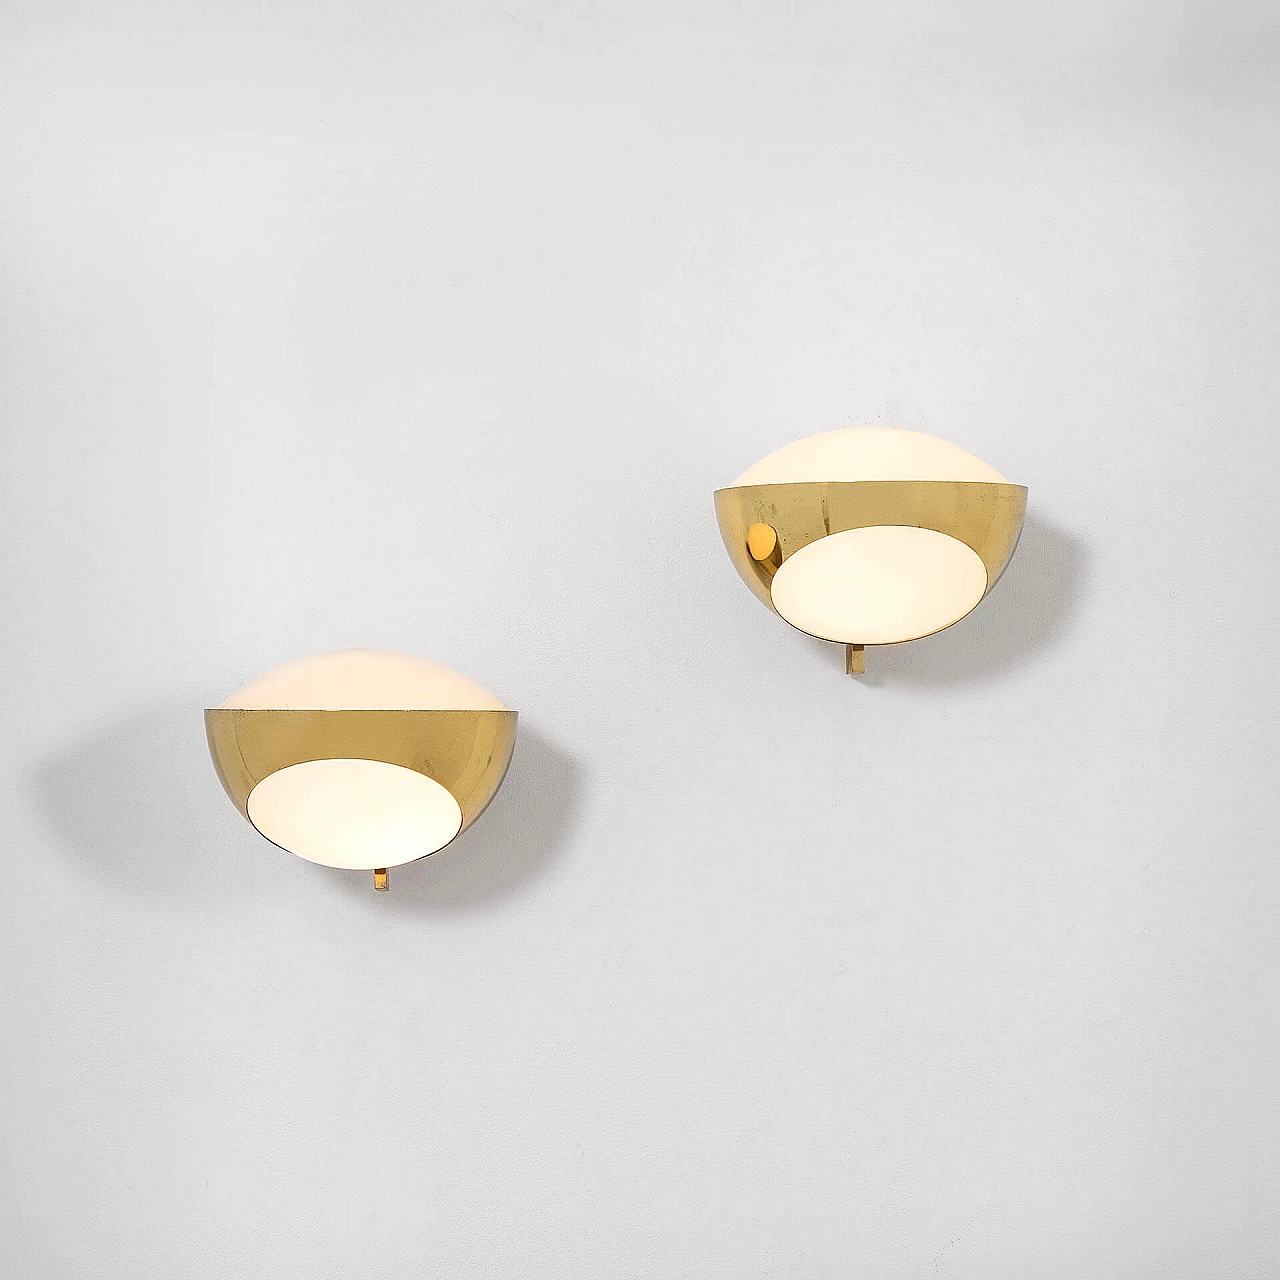 Pair of 1963 model wall lamps in brass by Max Ingrand for Fontana Arte 1